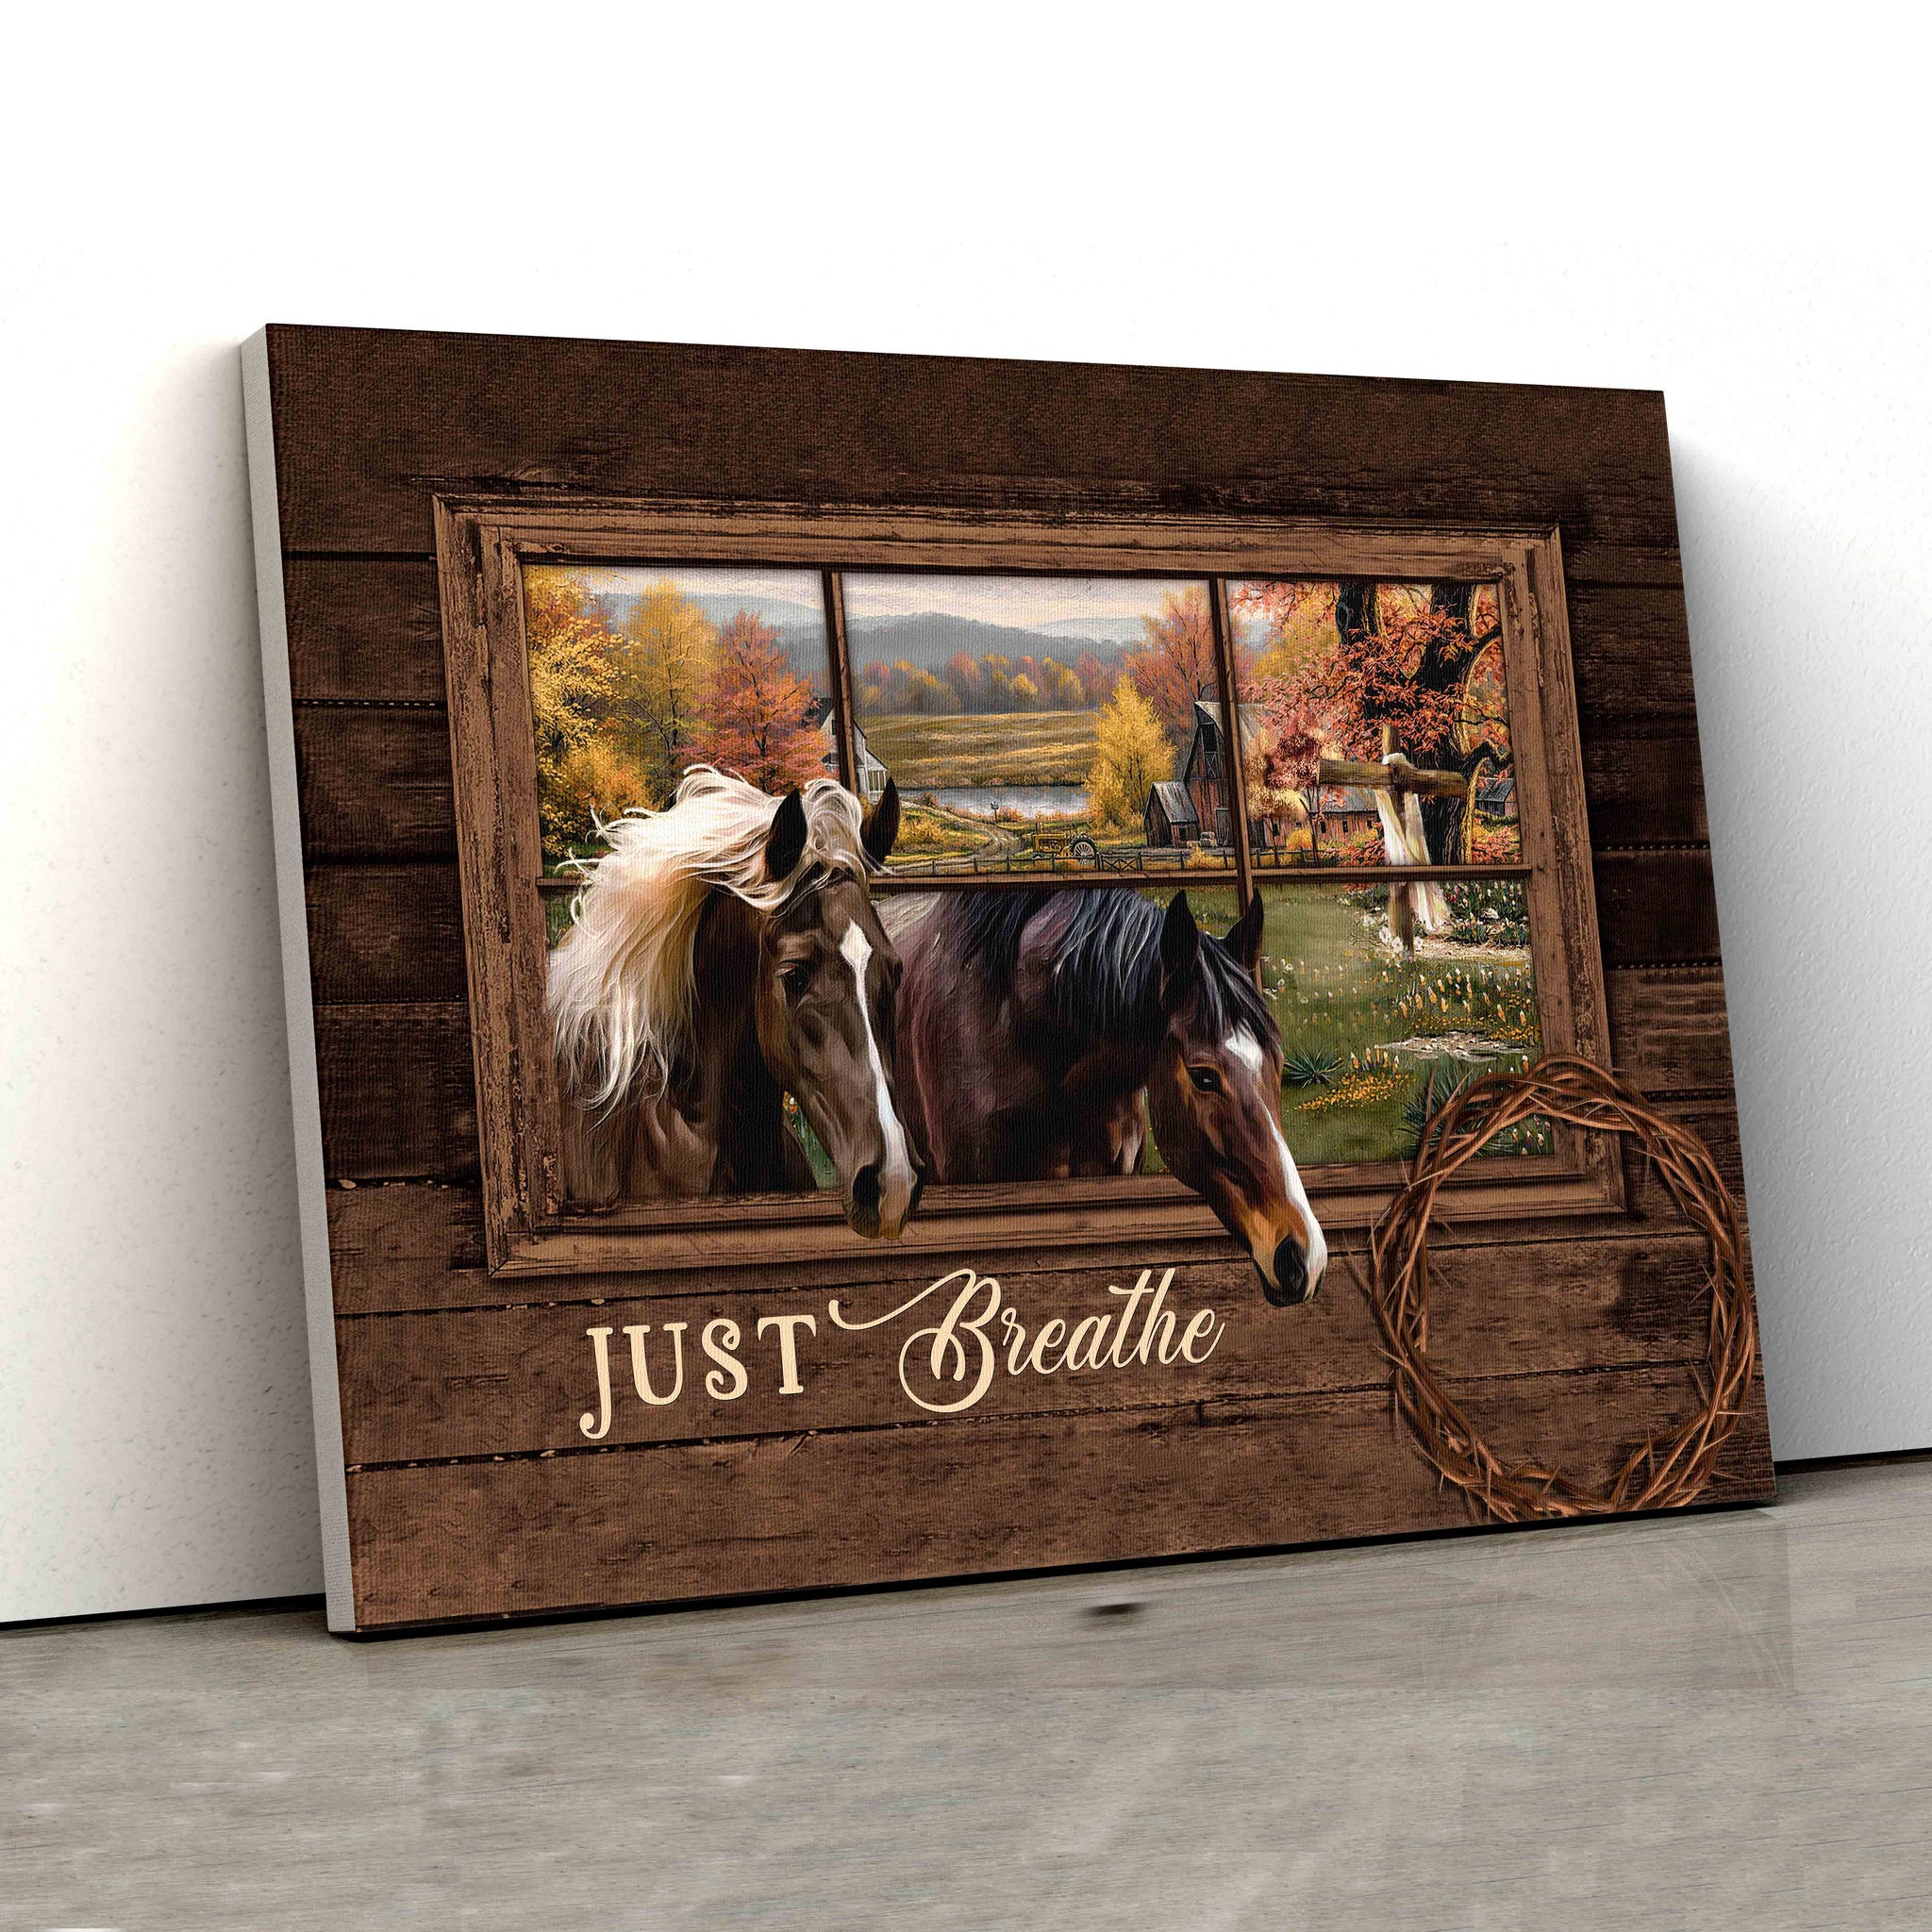 Just Breathe Canvas, Horse Canvas, Autumn Forest Canvas, Crown Of Thorns Canvas, Cross Canvas, Canvas Wall Art, Gift Canvas